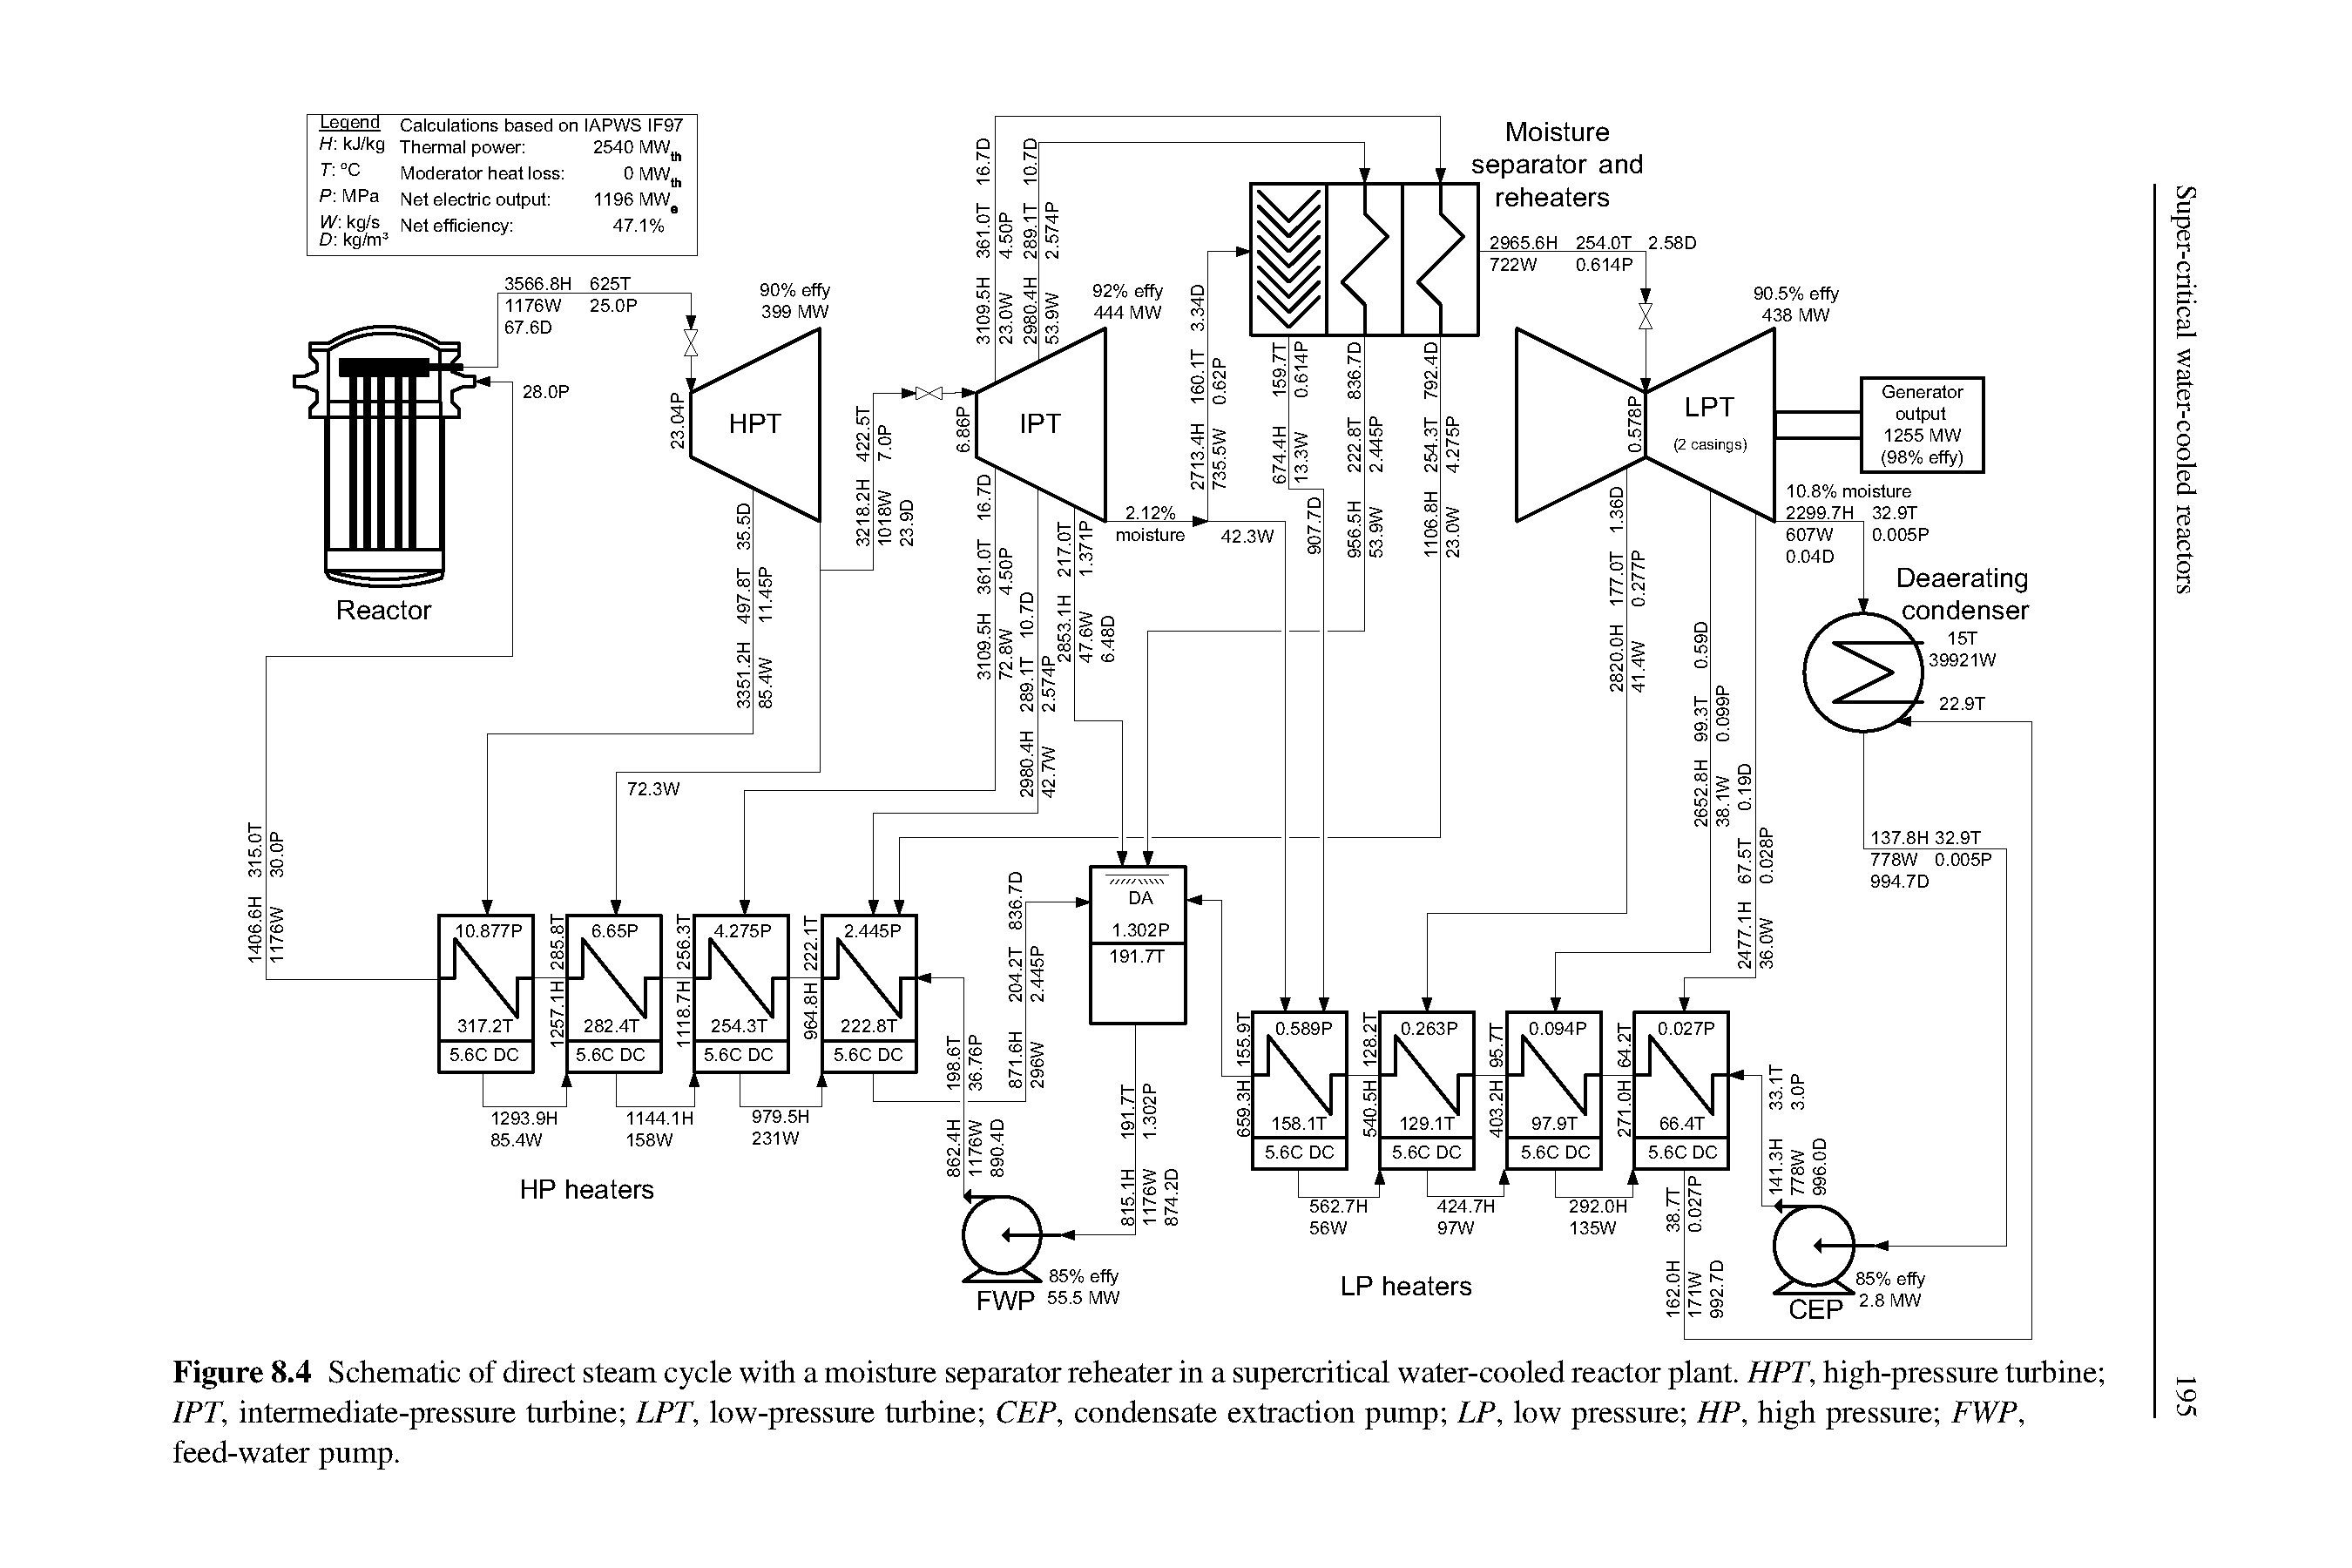 Figure 8.4 Schematic of direct steam cycle with a moisture separator reheater in a supercritical water-cooled reactor plant. HPT, high-pressure turbine IPT, intermediate-pressure turbine LPT, low-pressure turbine CEP, condensate extraction pump LP, low pressure HP, high pressure FWP, feed-water pump.